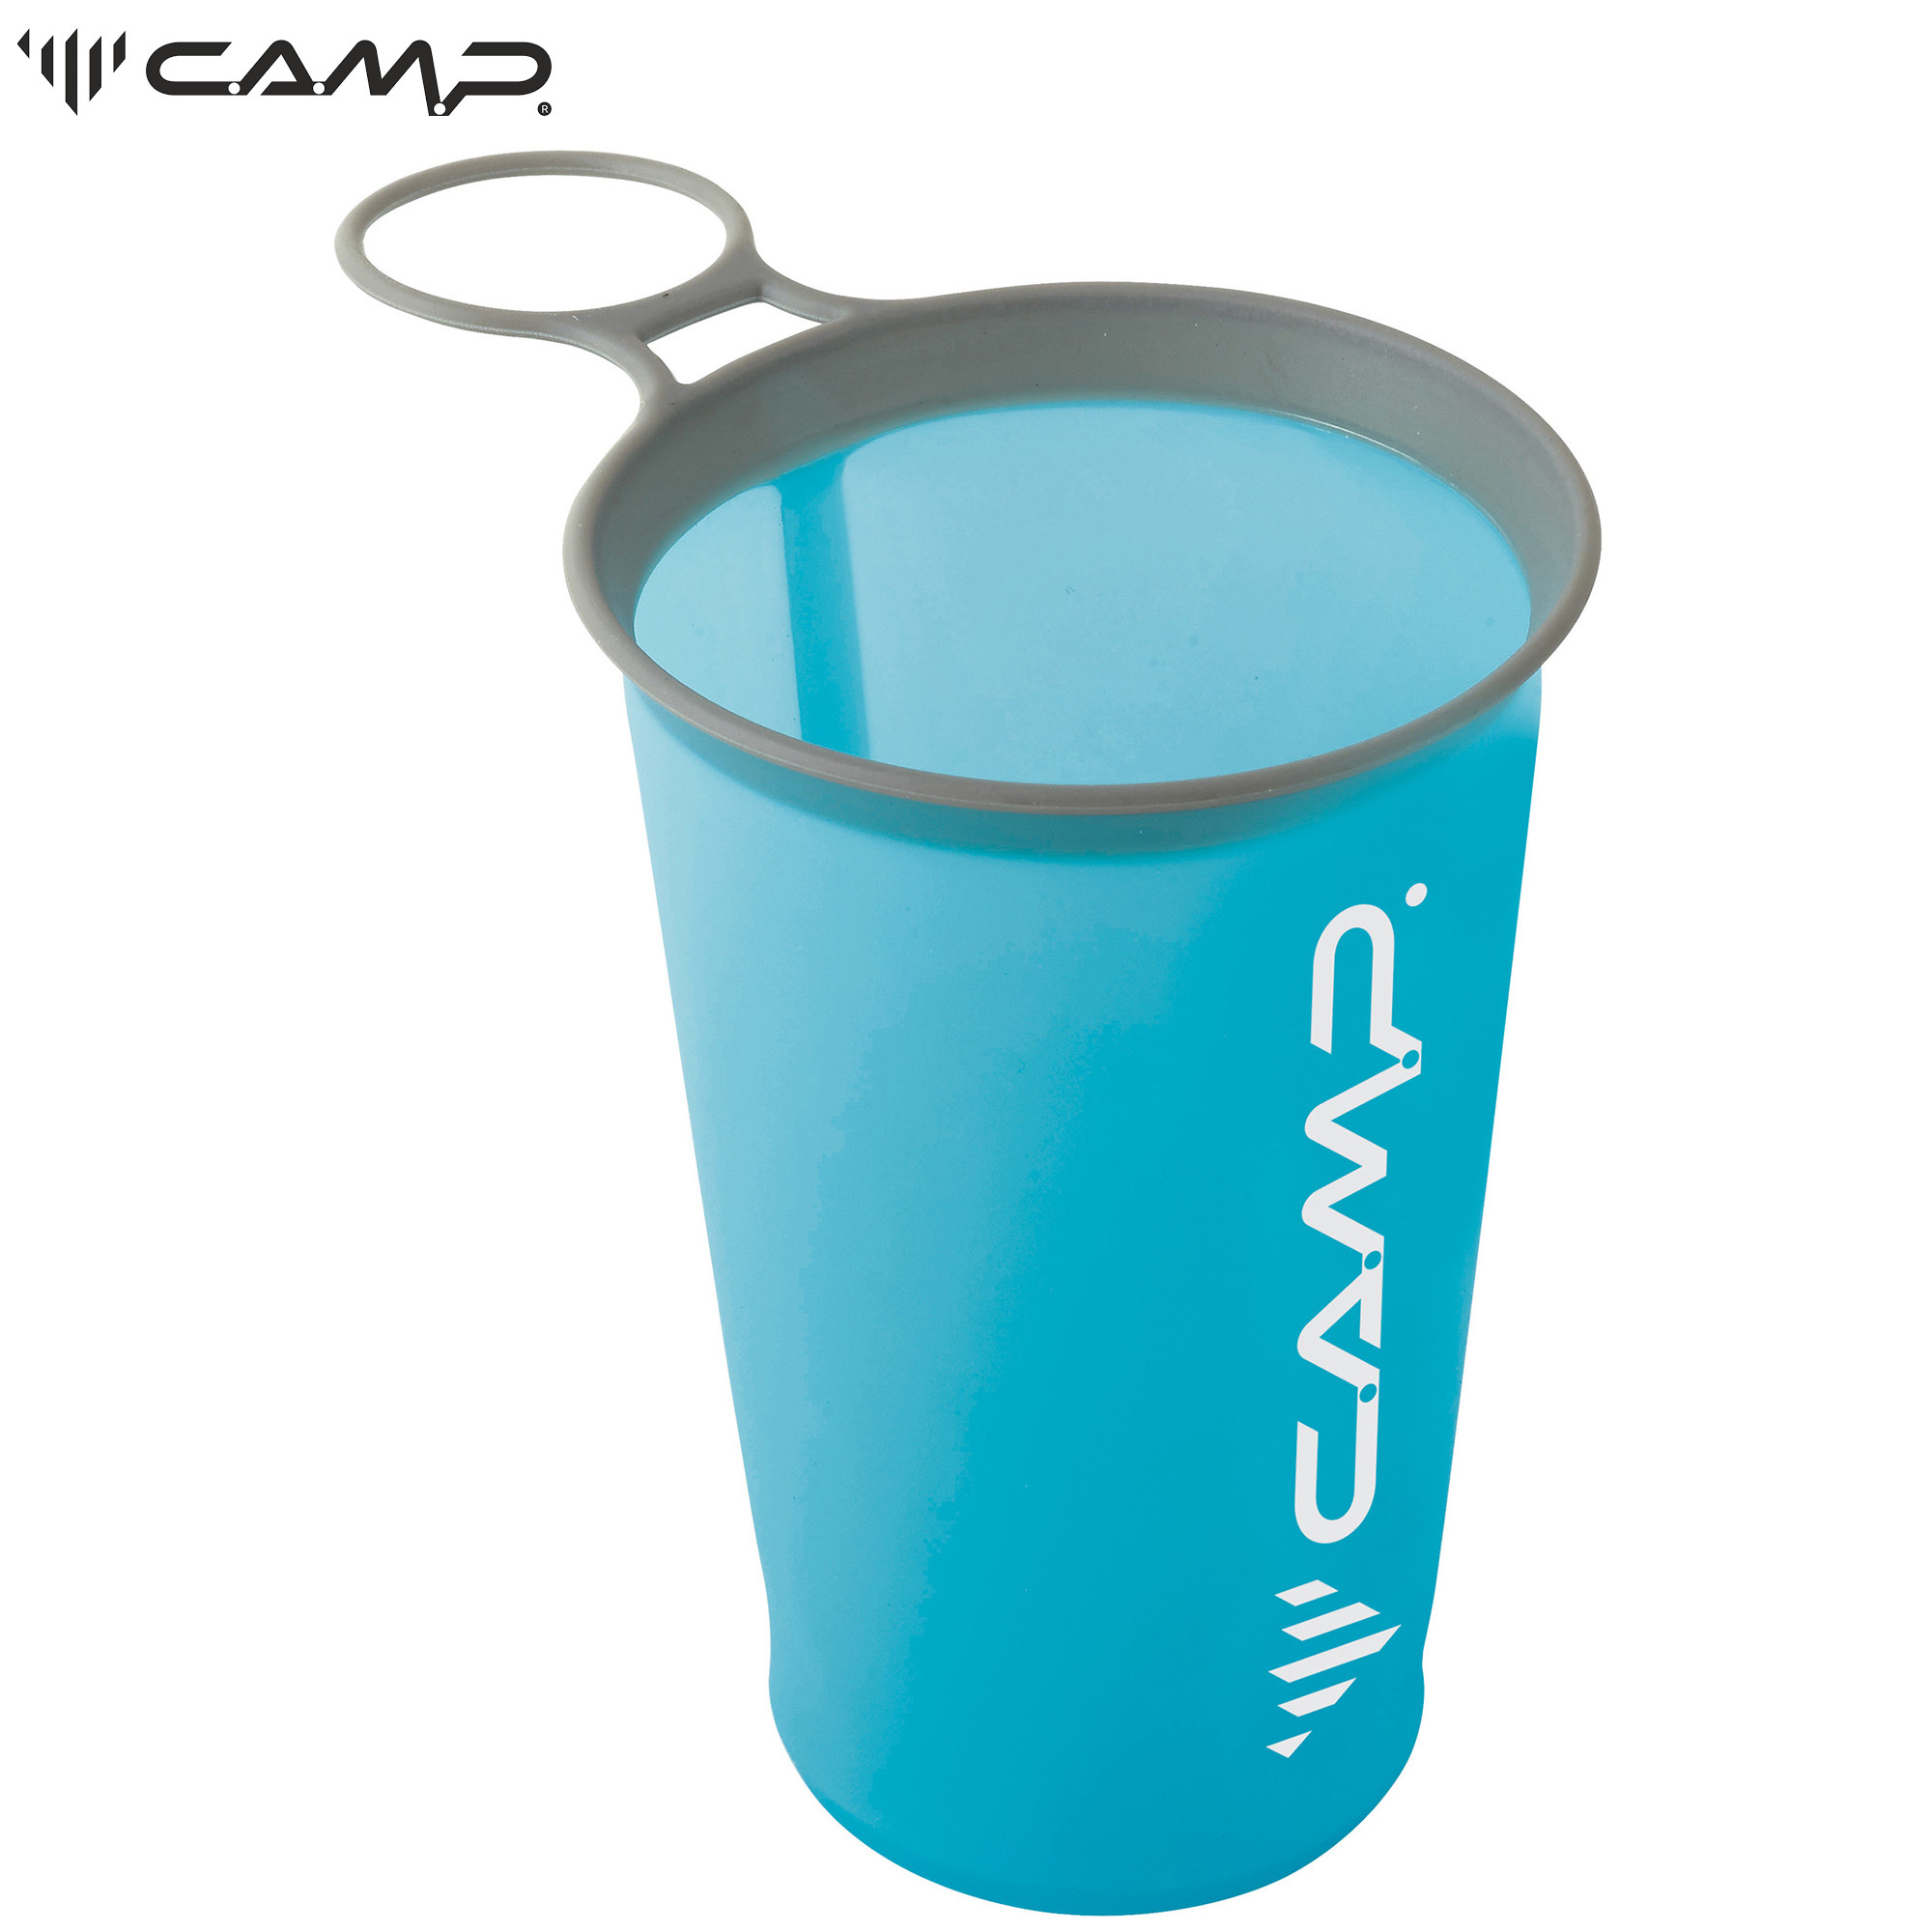 Camp SC 200 Compressible Cup 200 ml